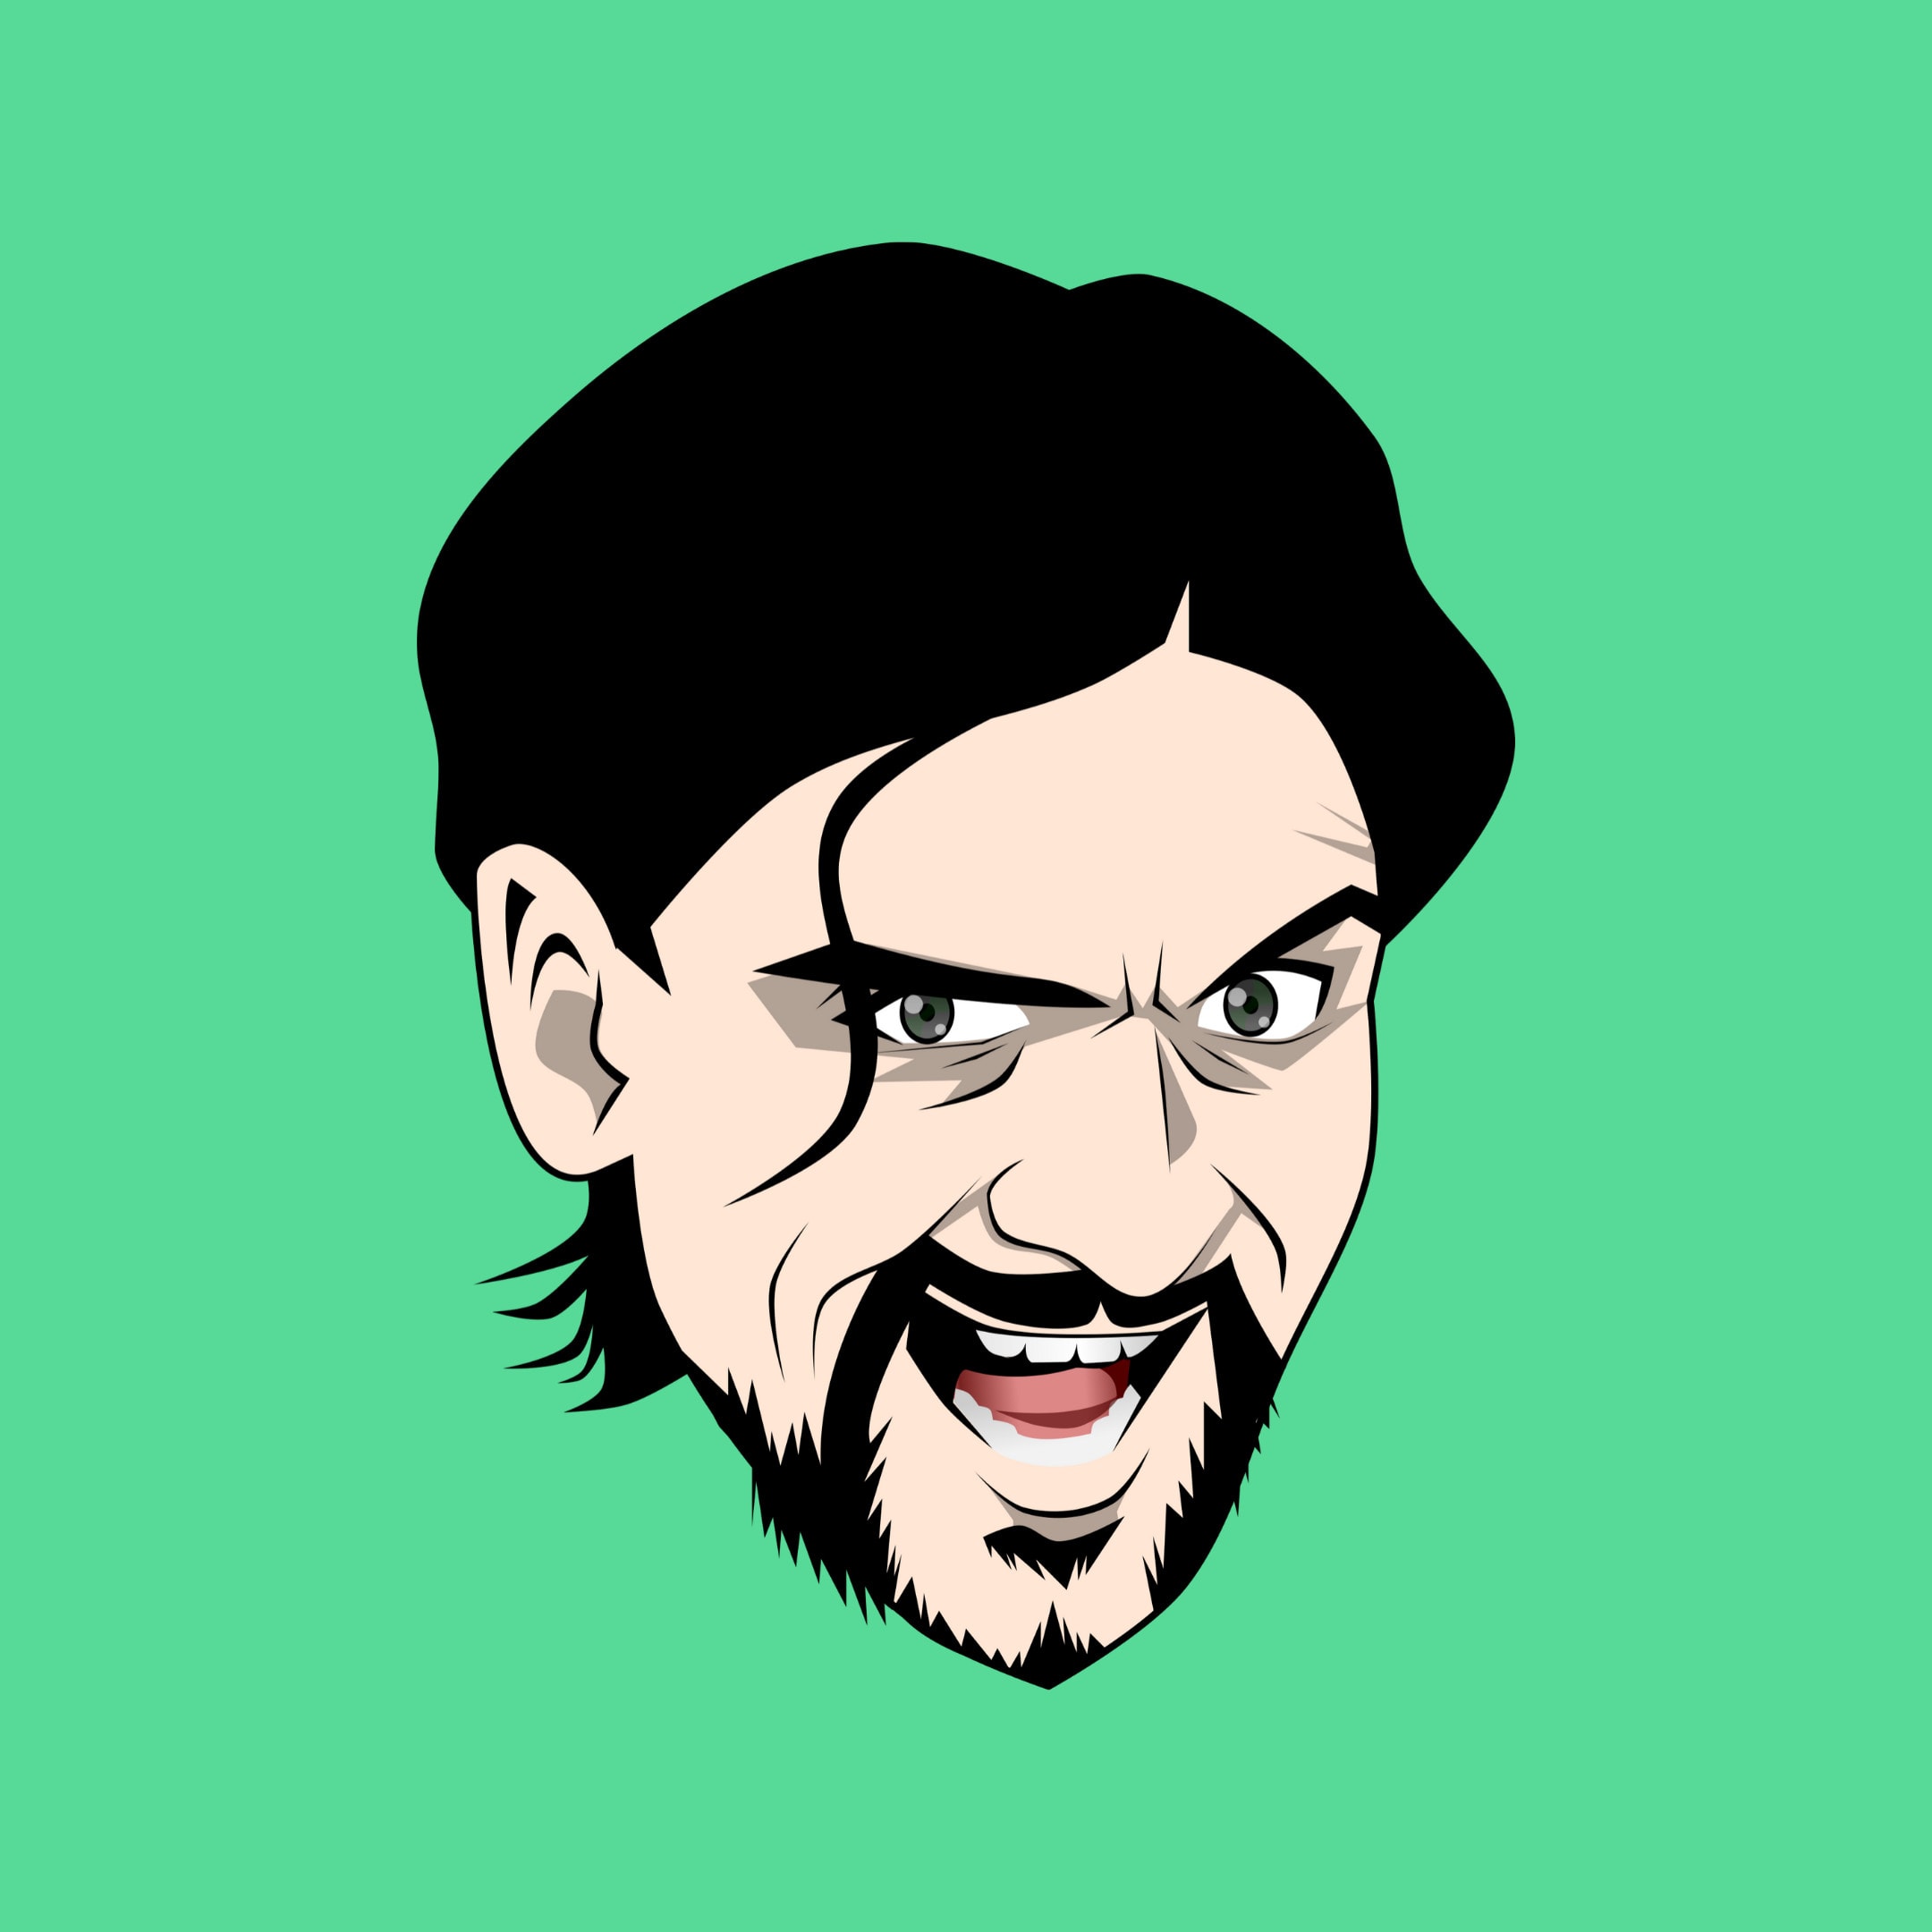 Make vector art of any face in my cartoon style by Slavoury | Fiverr